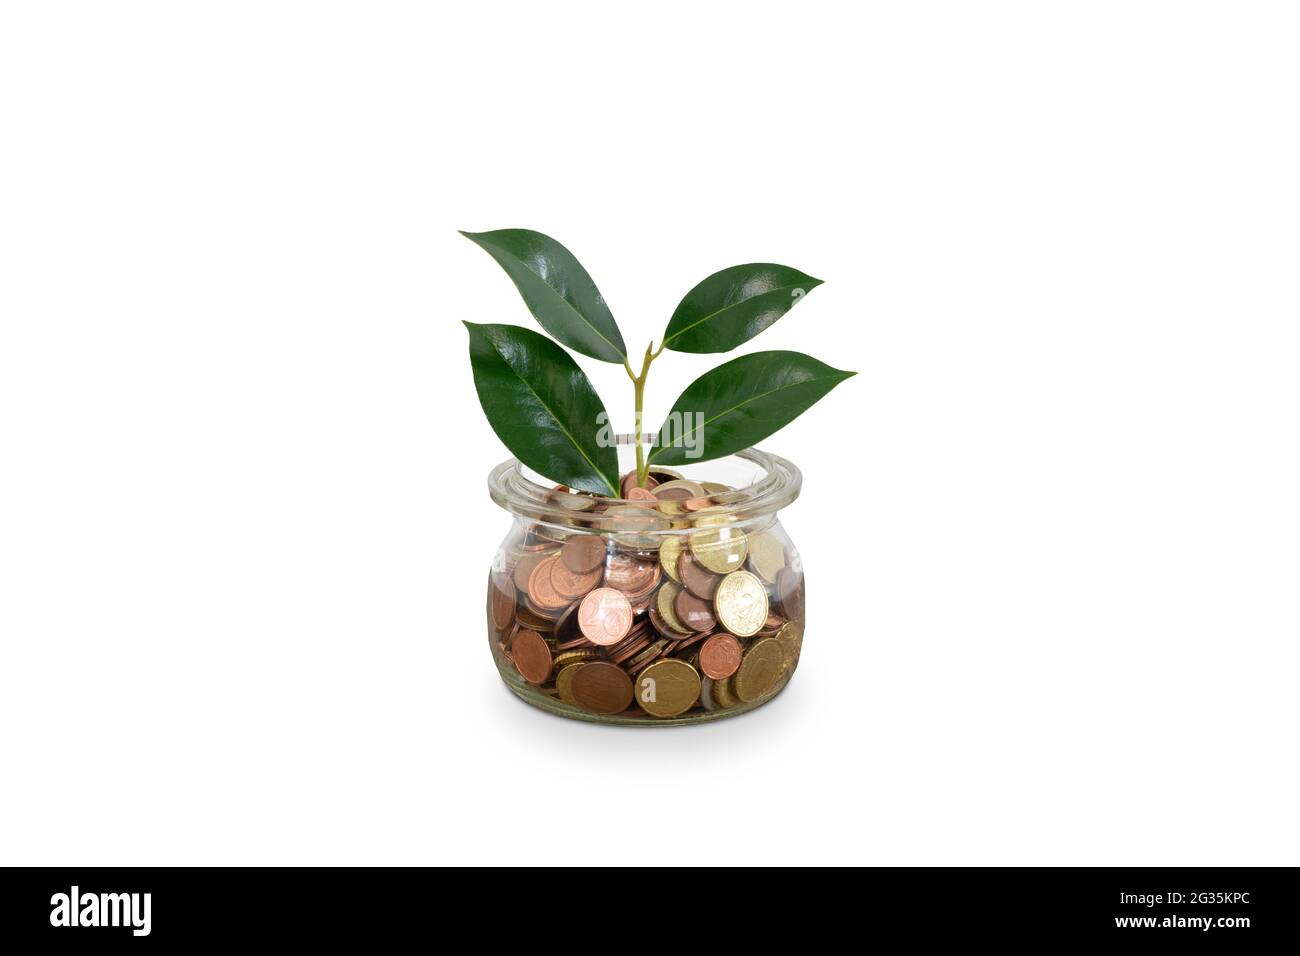 Plant growing in money jar saved coins. Isolated on white. Stock Photo